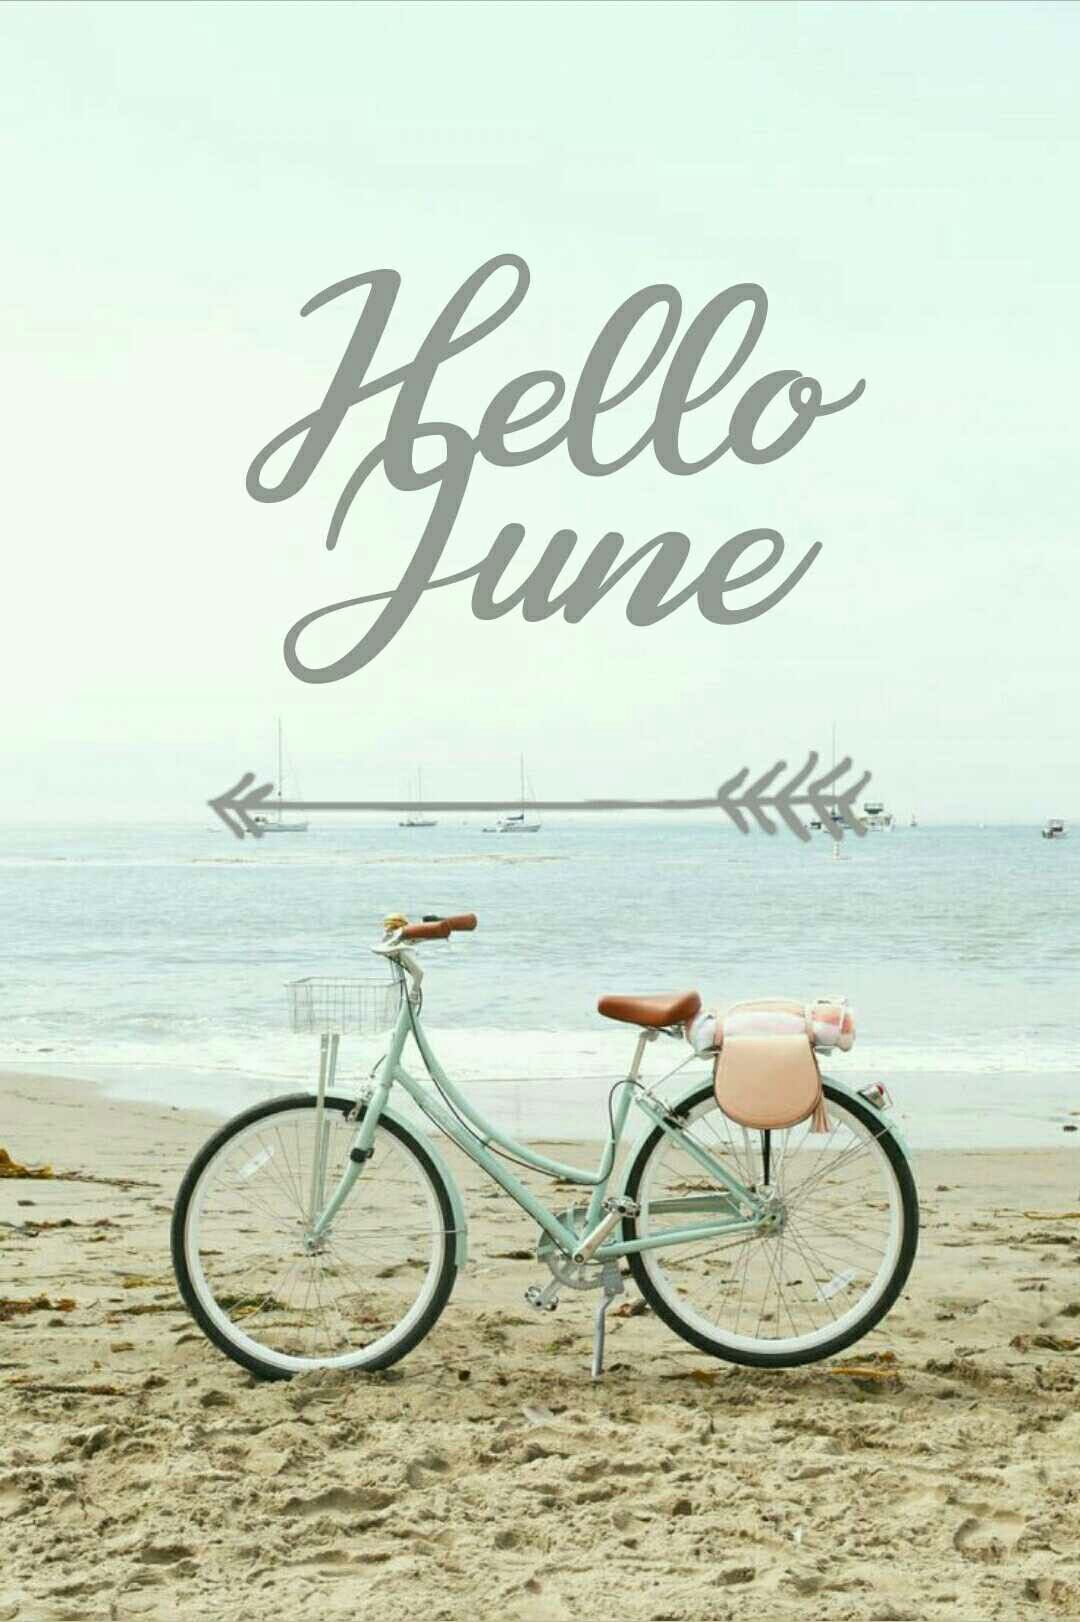 Hello June Wallpaper Discover more 31 Days, Beach, Beatiful, Cute, Hello June wallpaper.. Hello june, Background picture, Beautiful nature